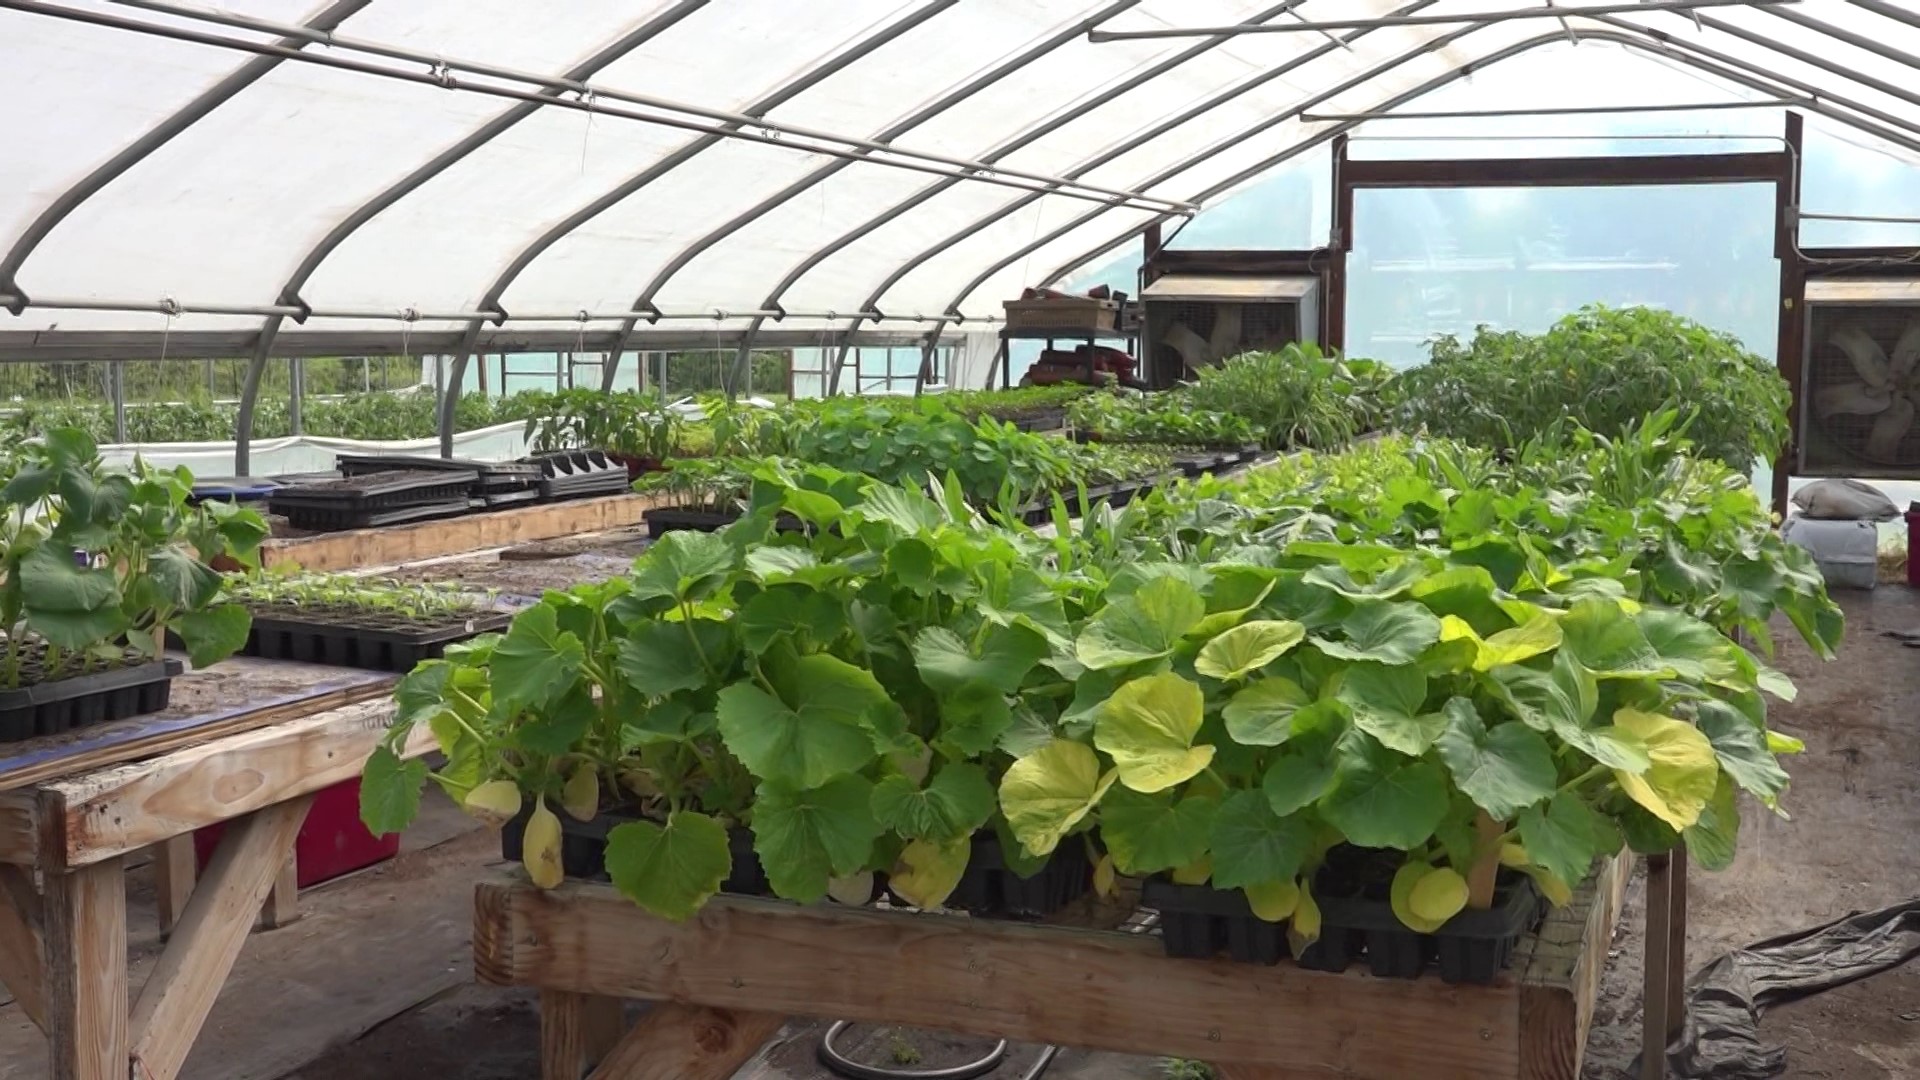 Cobblestone Farms is growing food for the purpose to give it to those in need. It also is looking to teach the community about farming in a sustainable way.